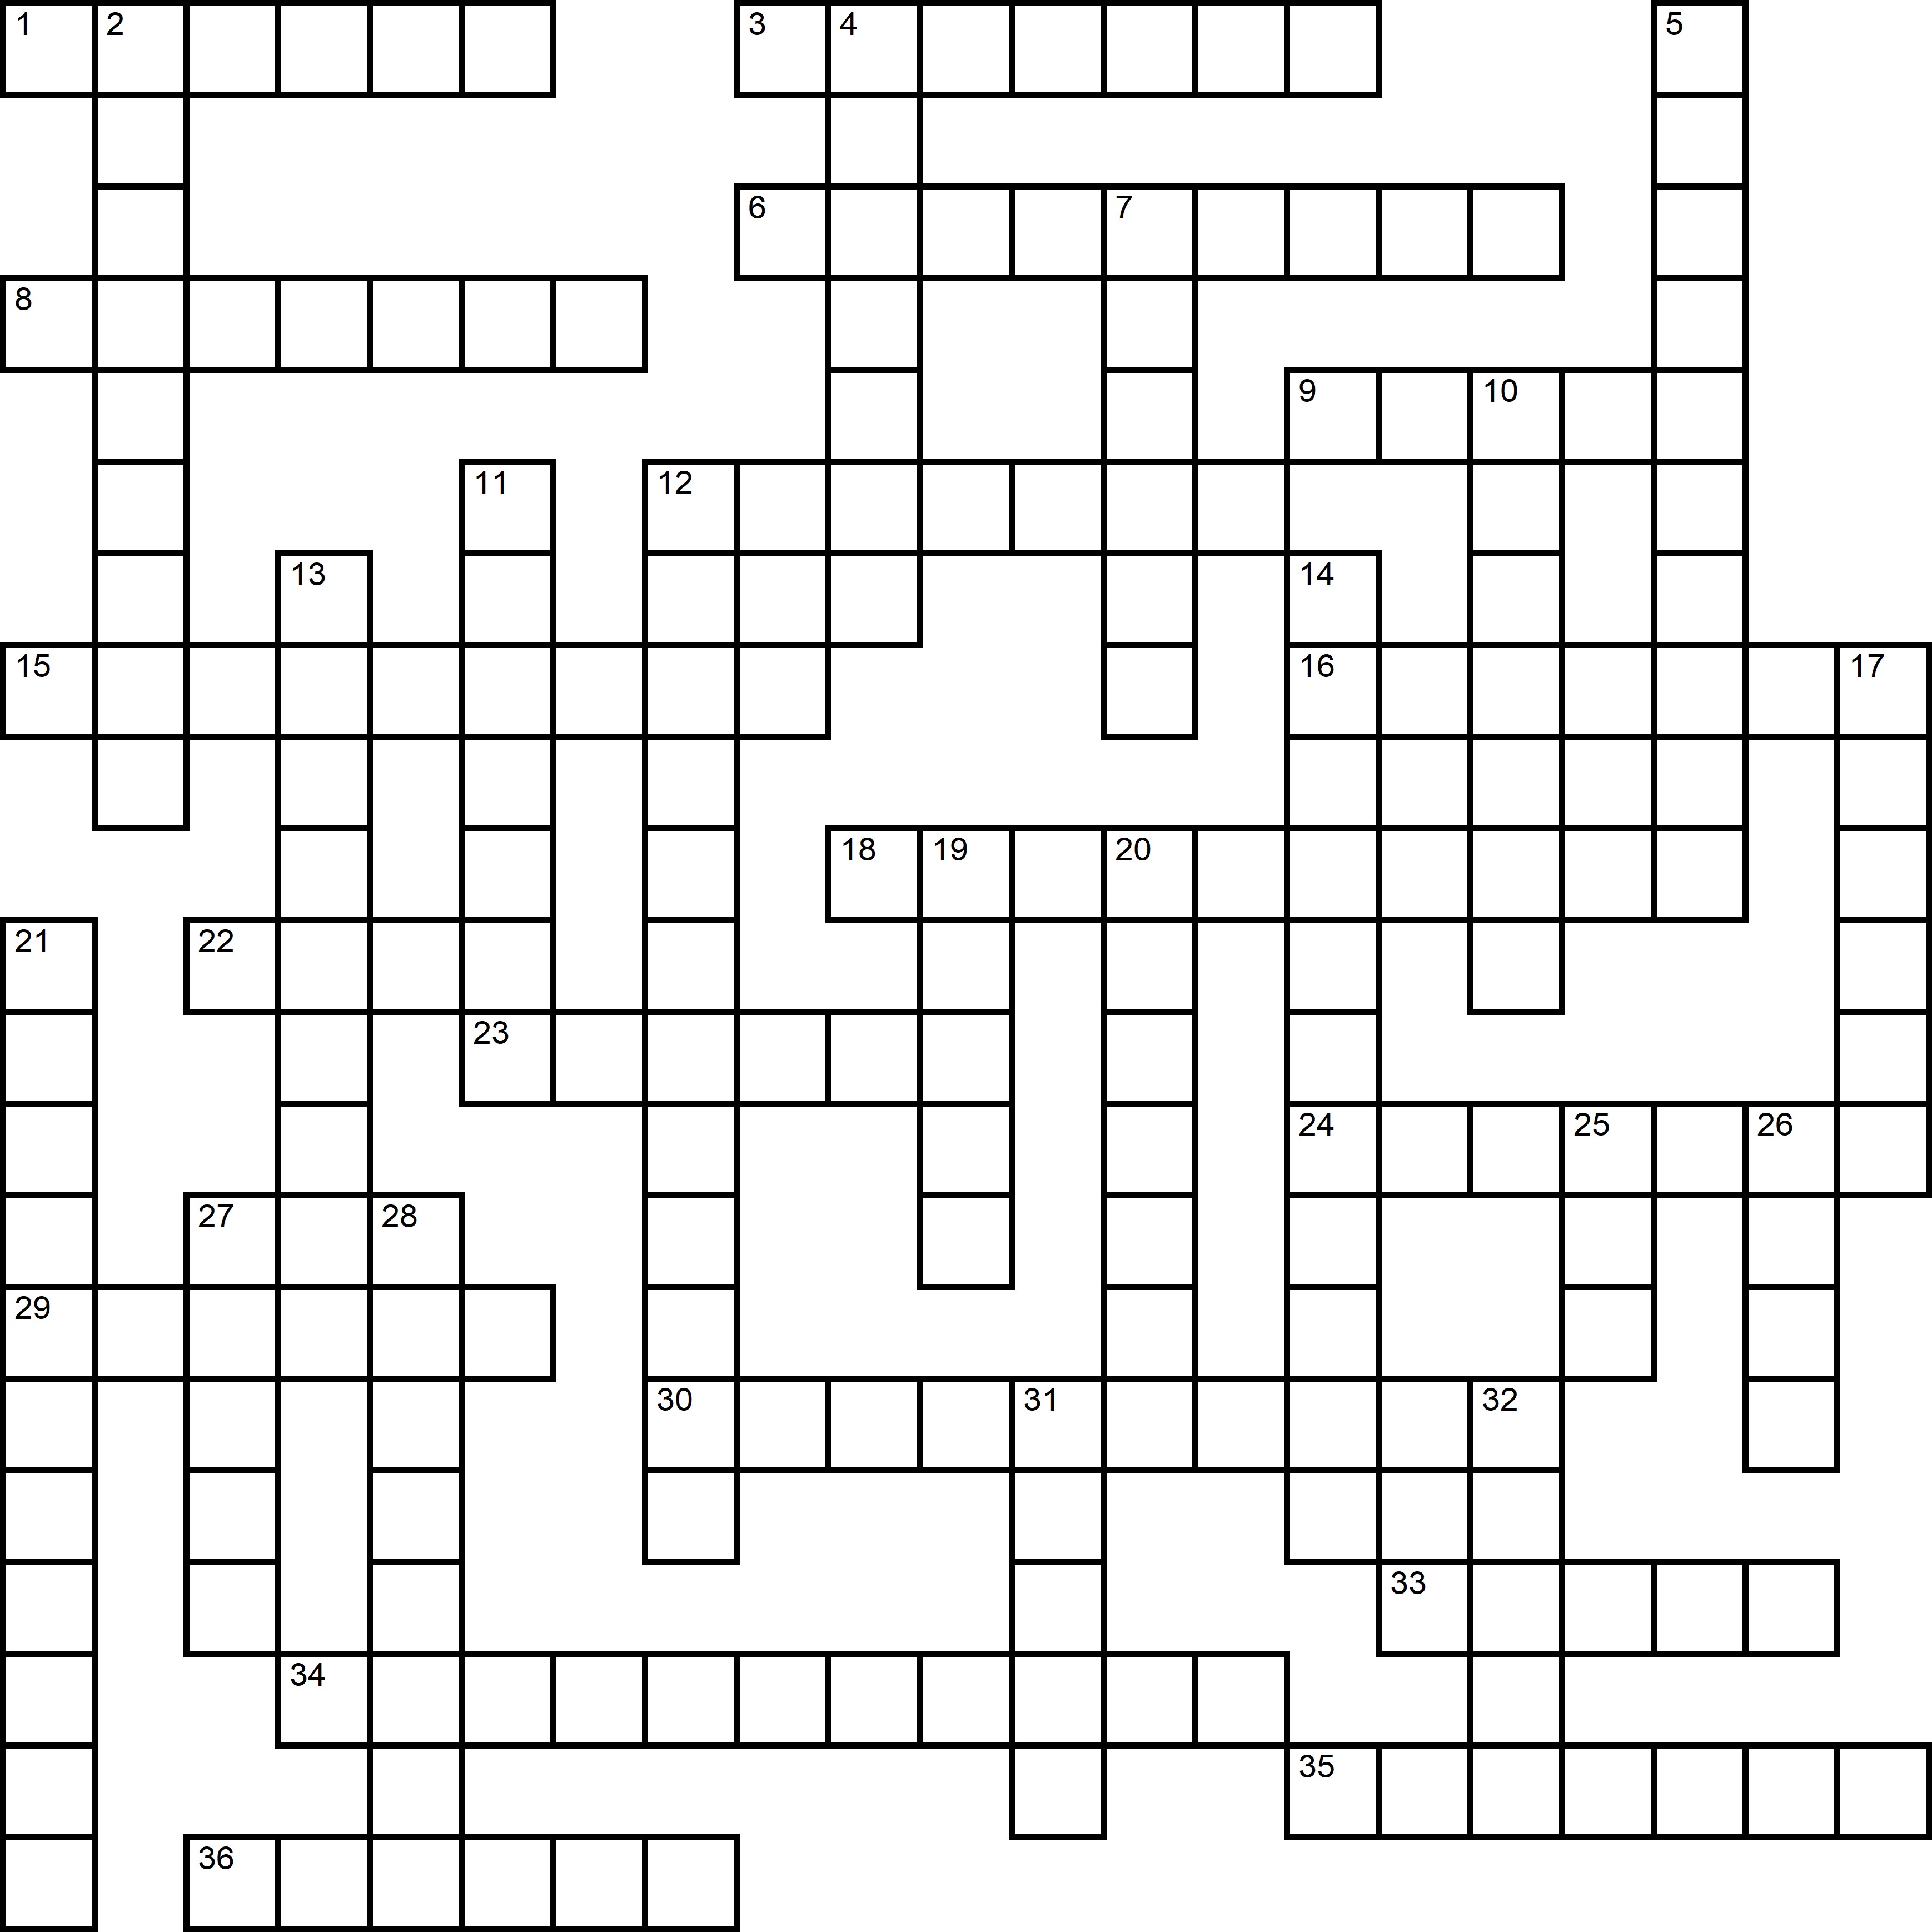 Easy Crossword About International Beer Day